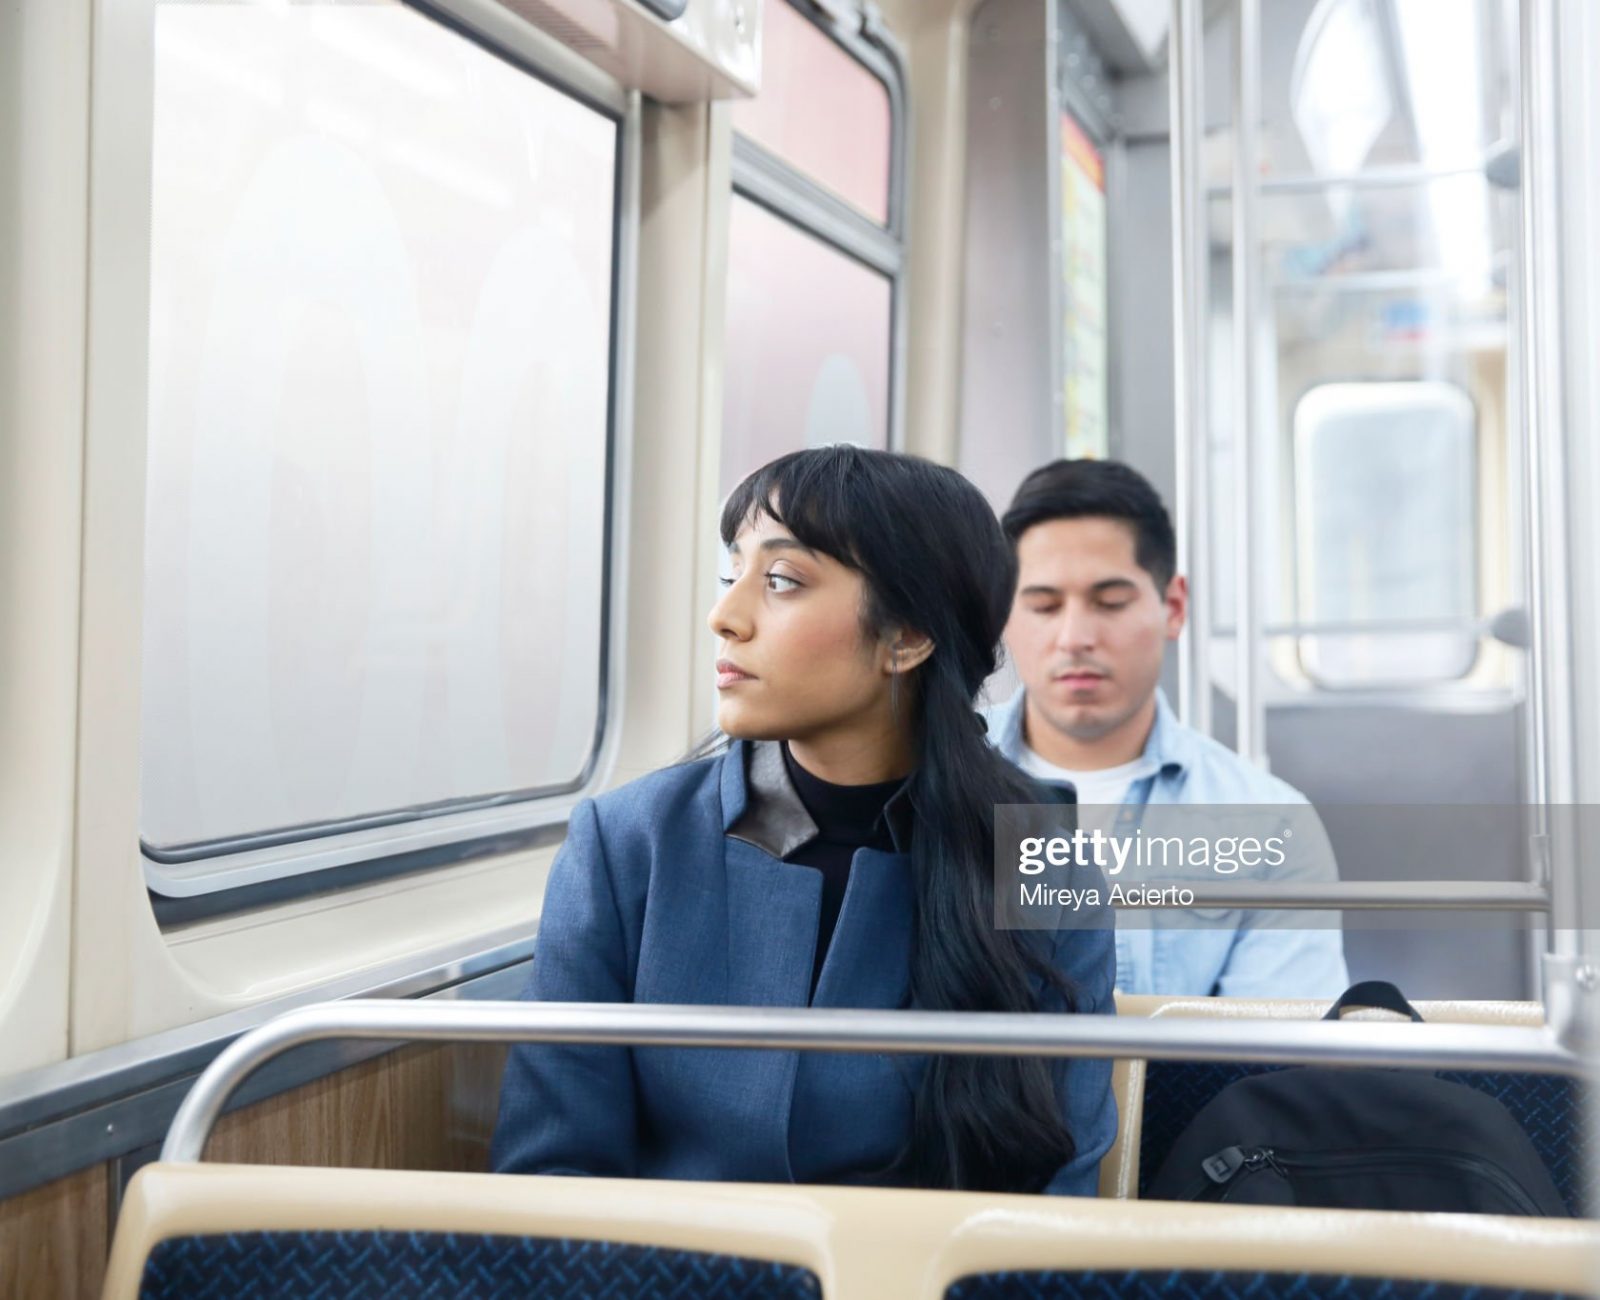 A LatinX male and female with long dark hair, sit on the subway train while wearing business casual clothing.